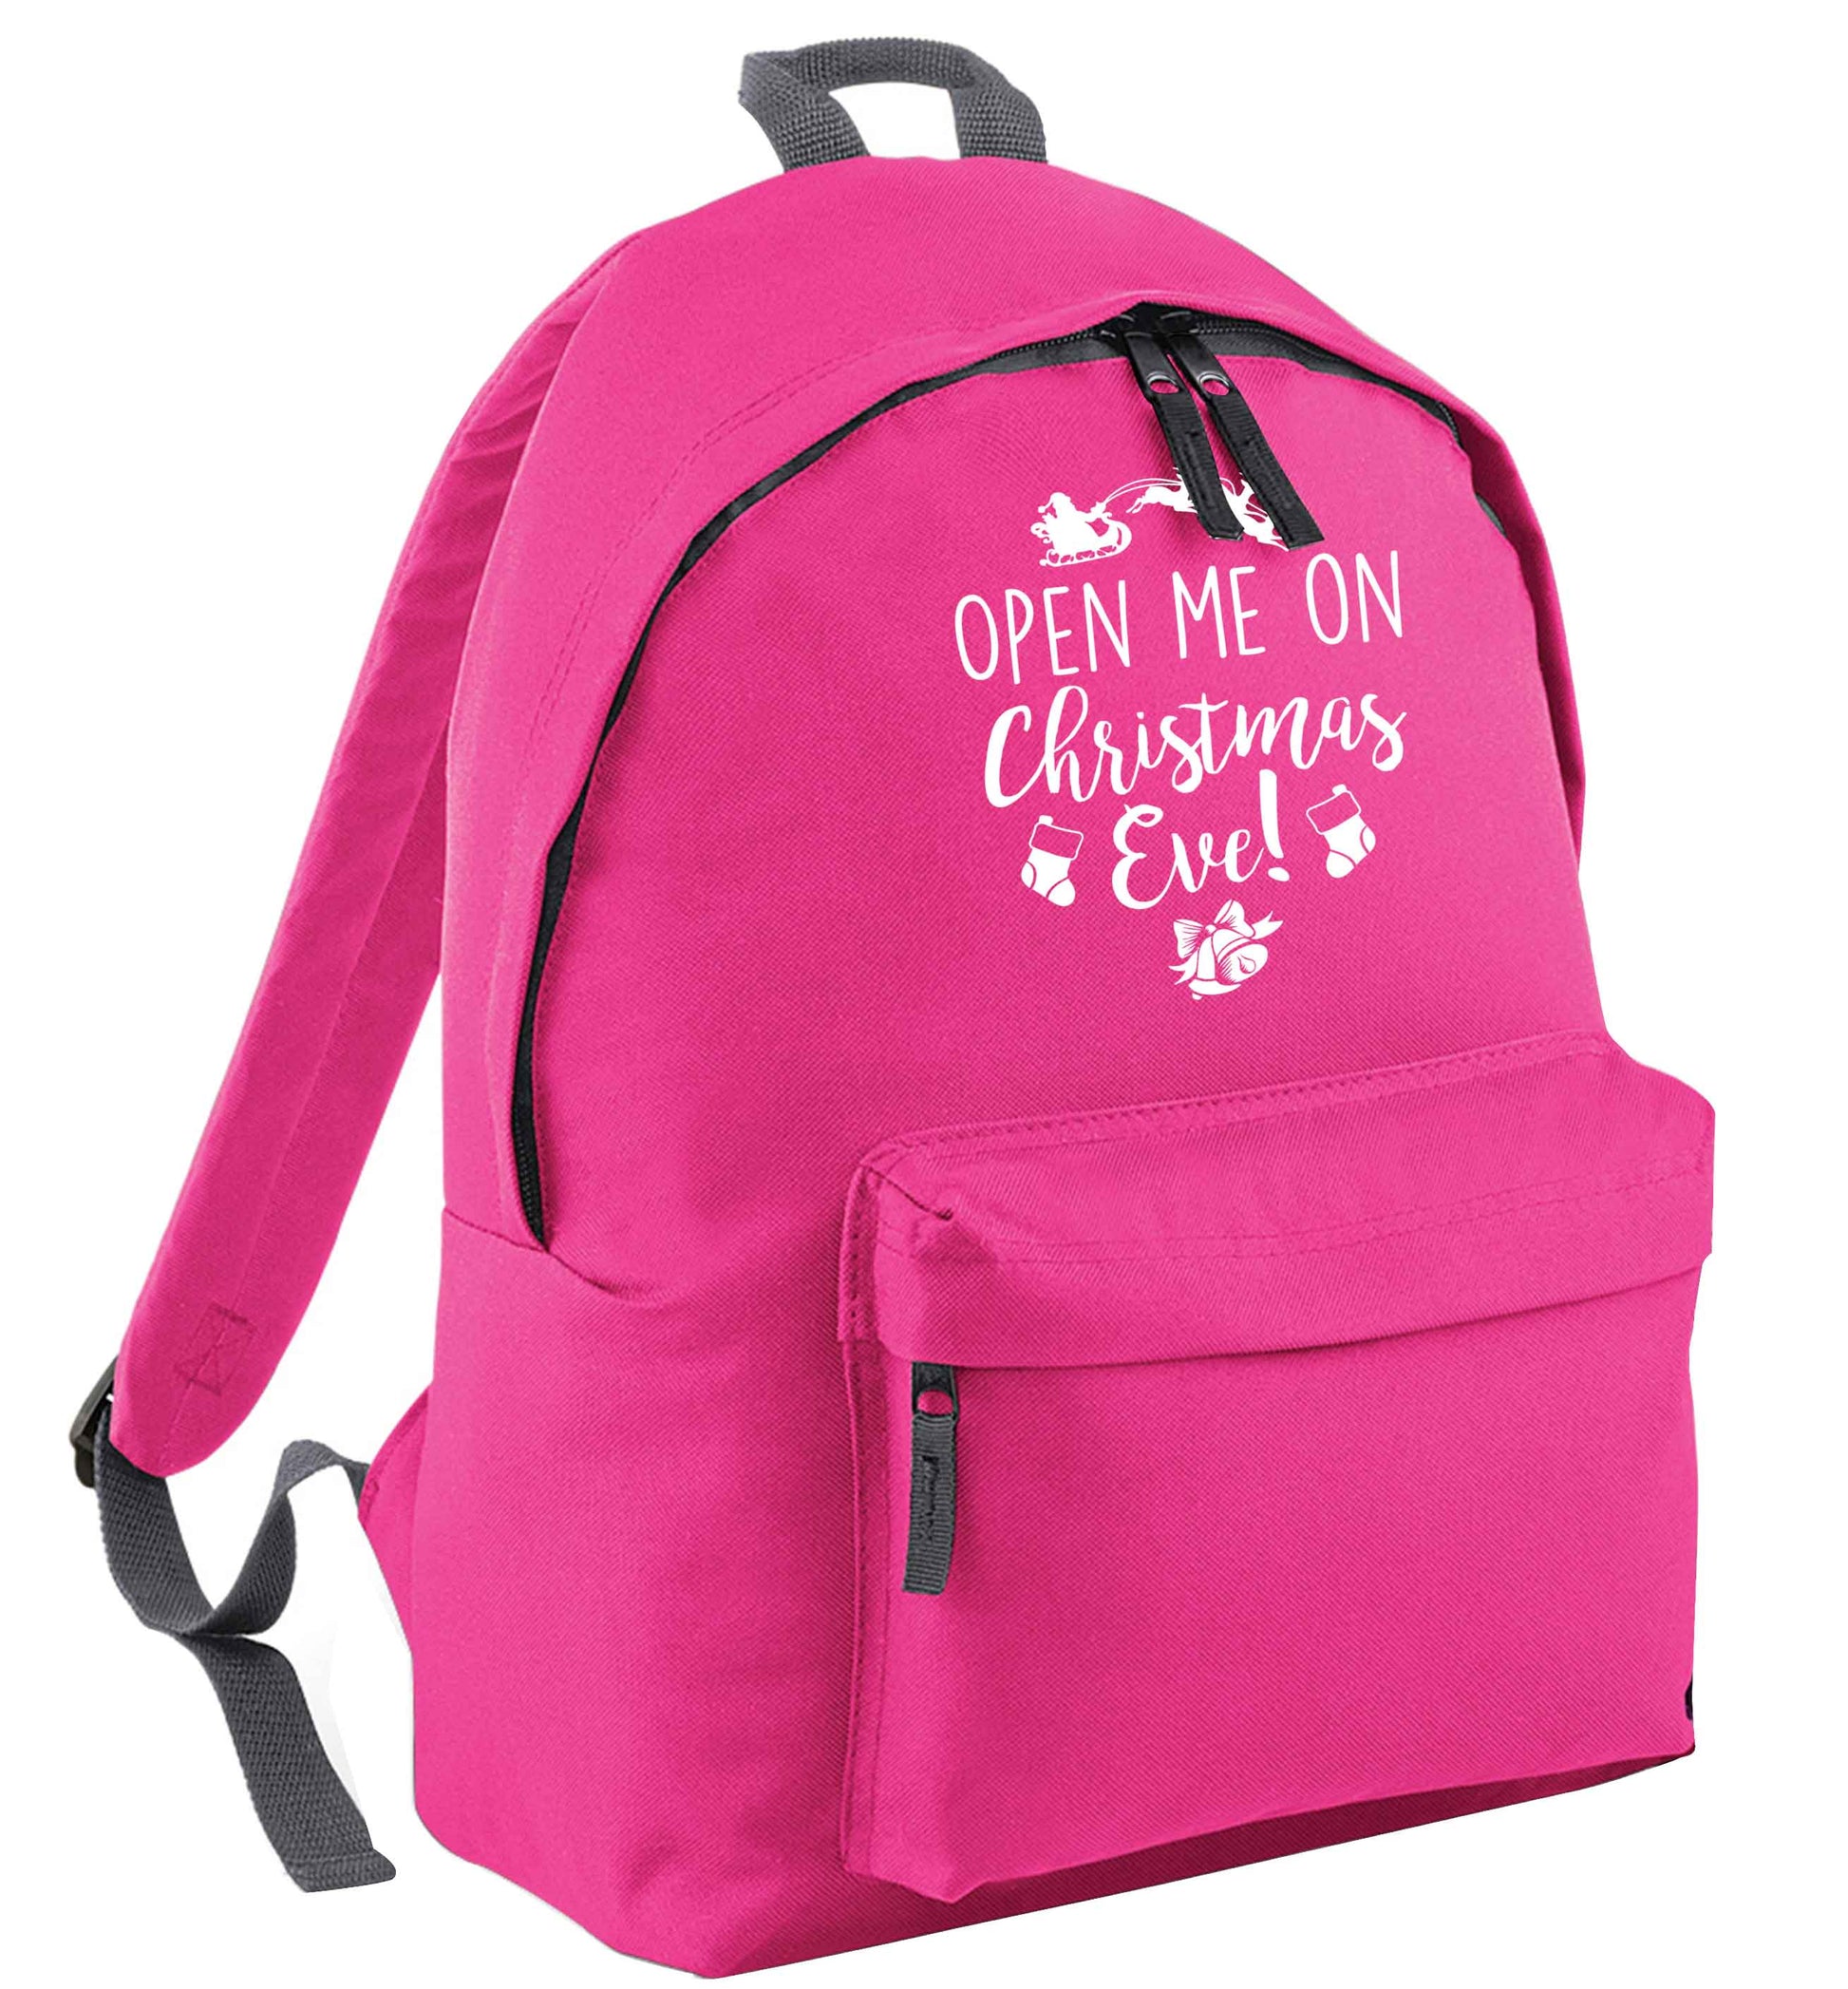 Open me on Christmas Day pink adults backpack